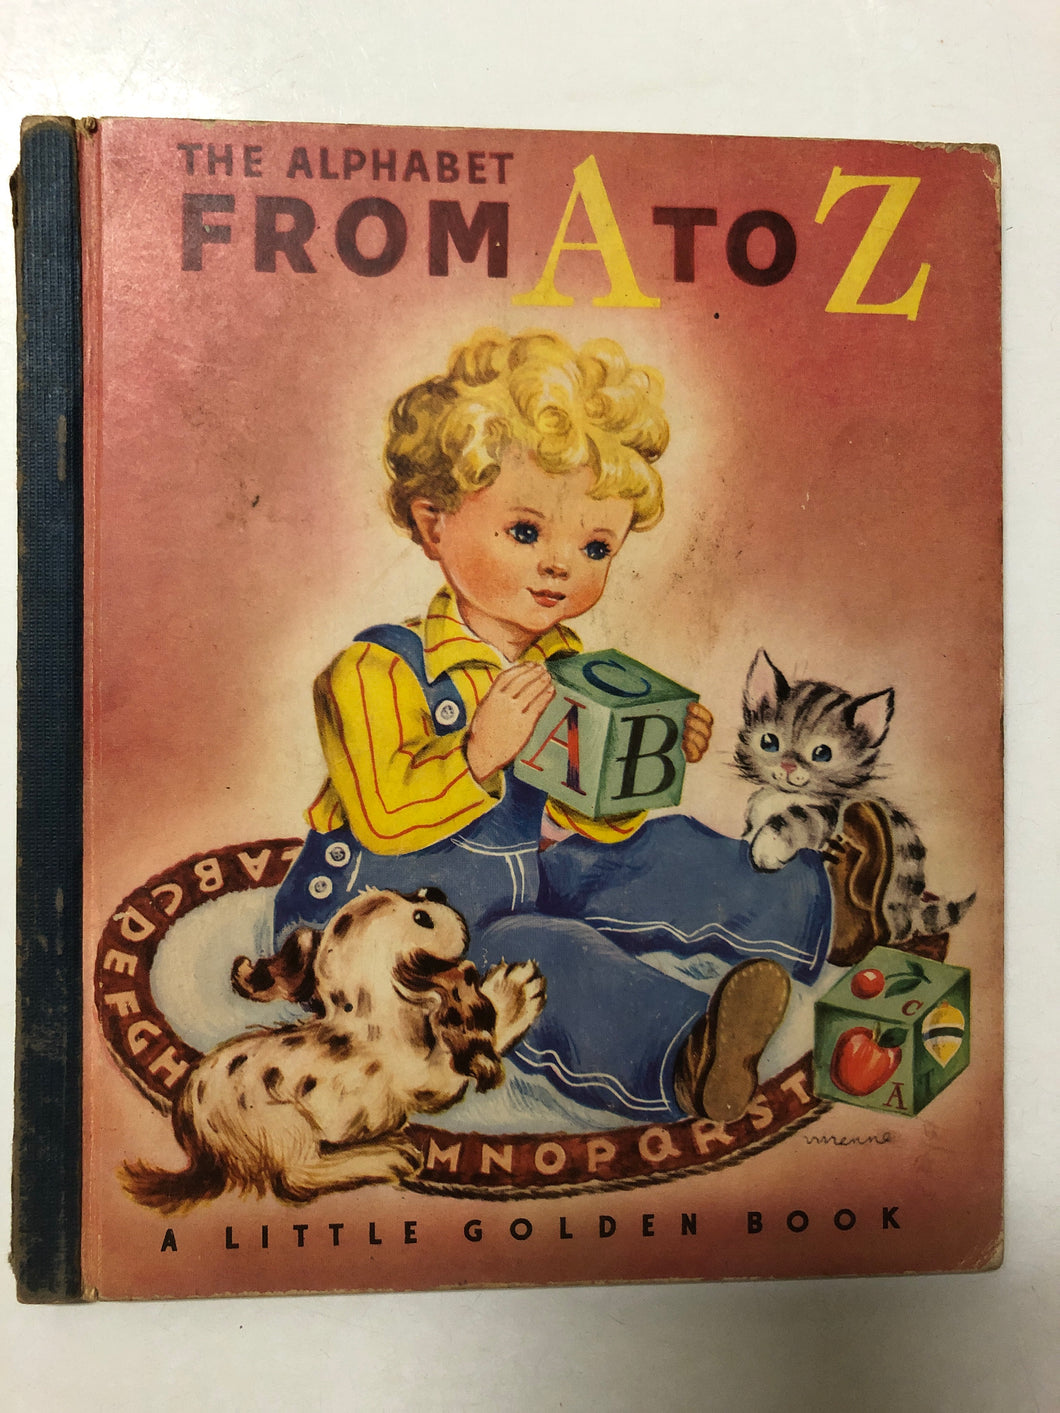 The Alphabet From A To Z - Slick Cat Books 